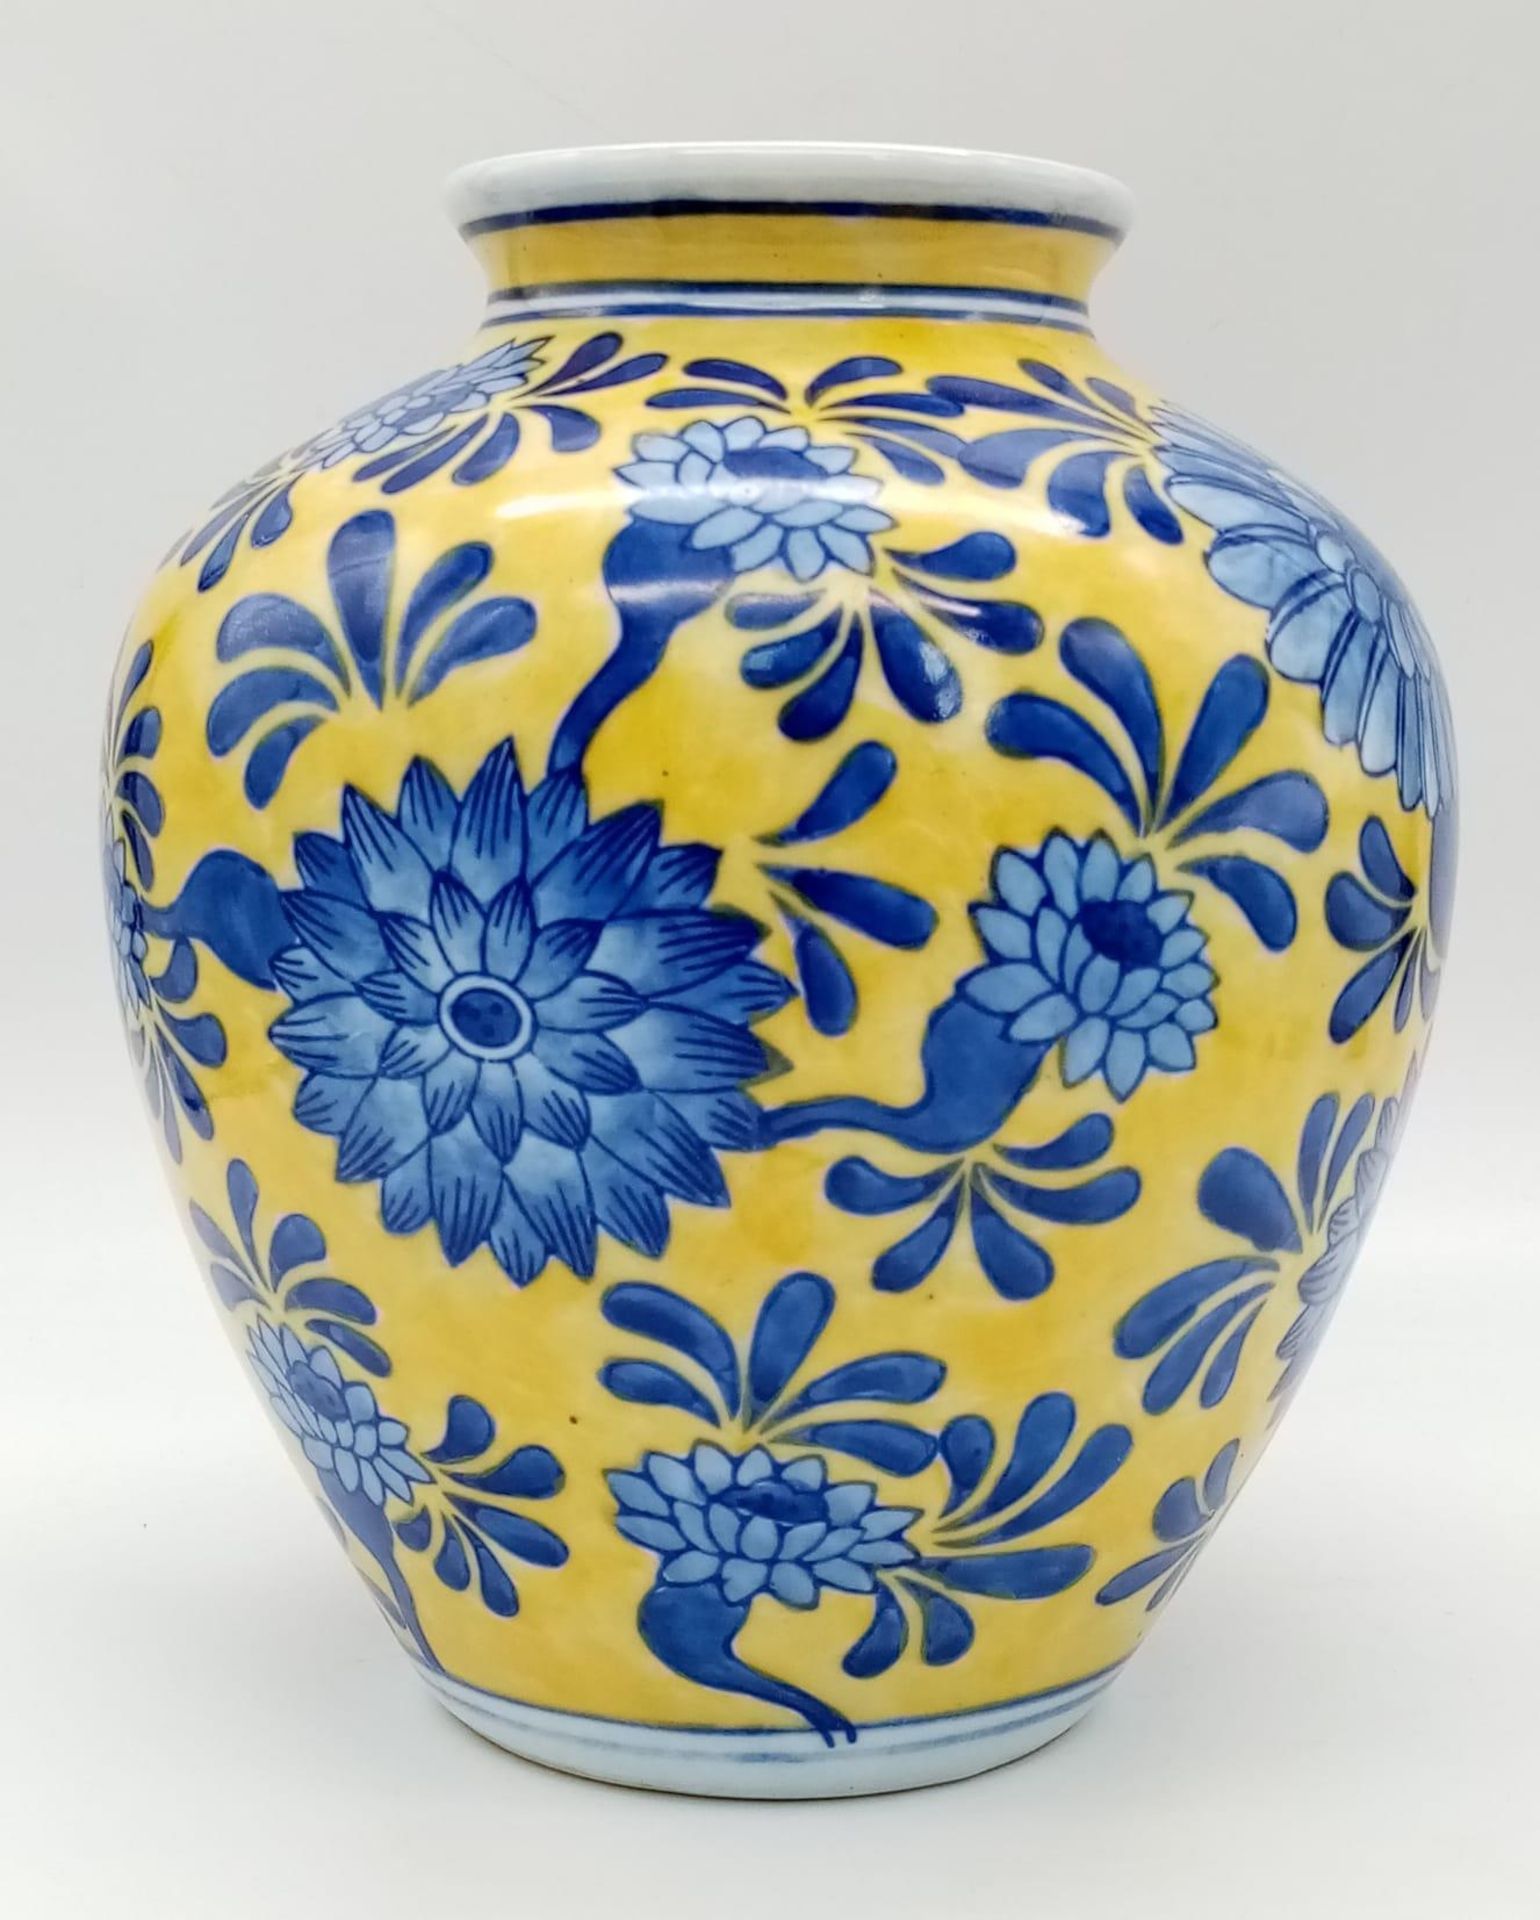 A Vintage Blue and Yellow Hand-Painted Vase. Faint makers mark on base. 21cm tall